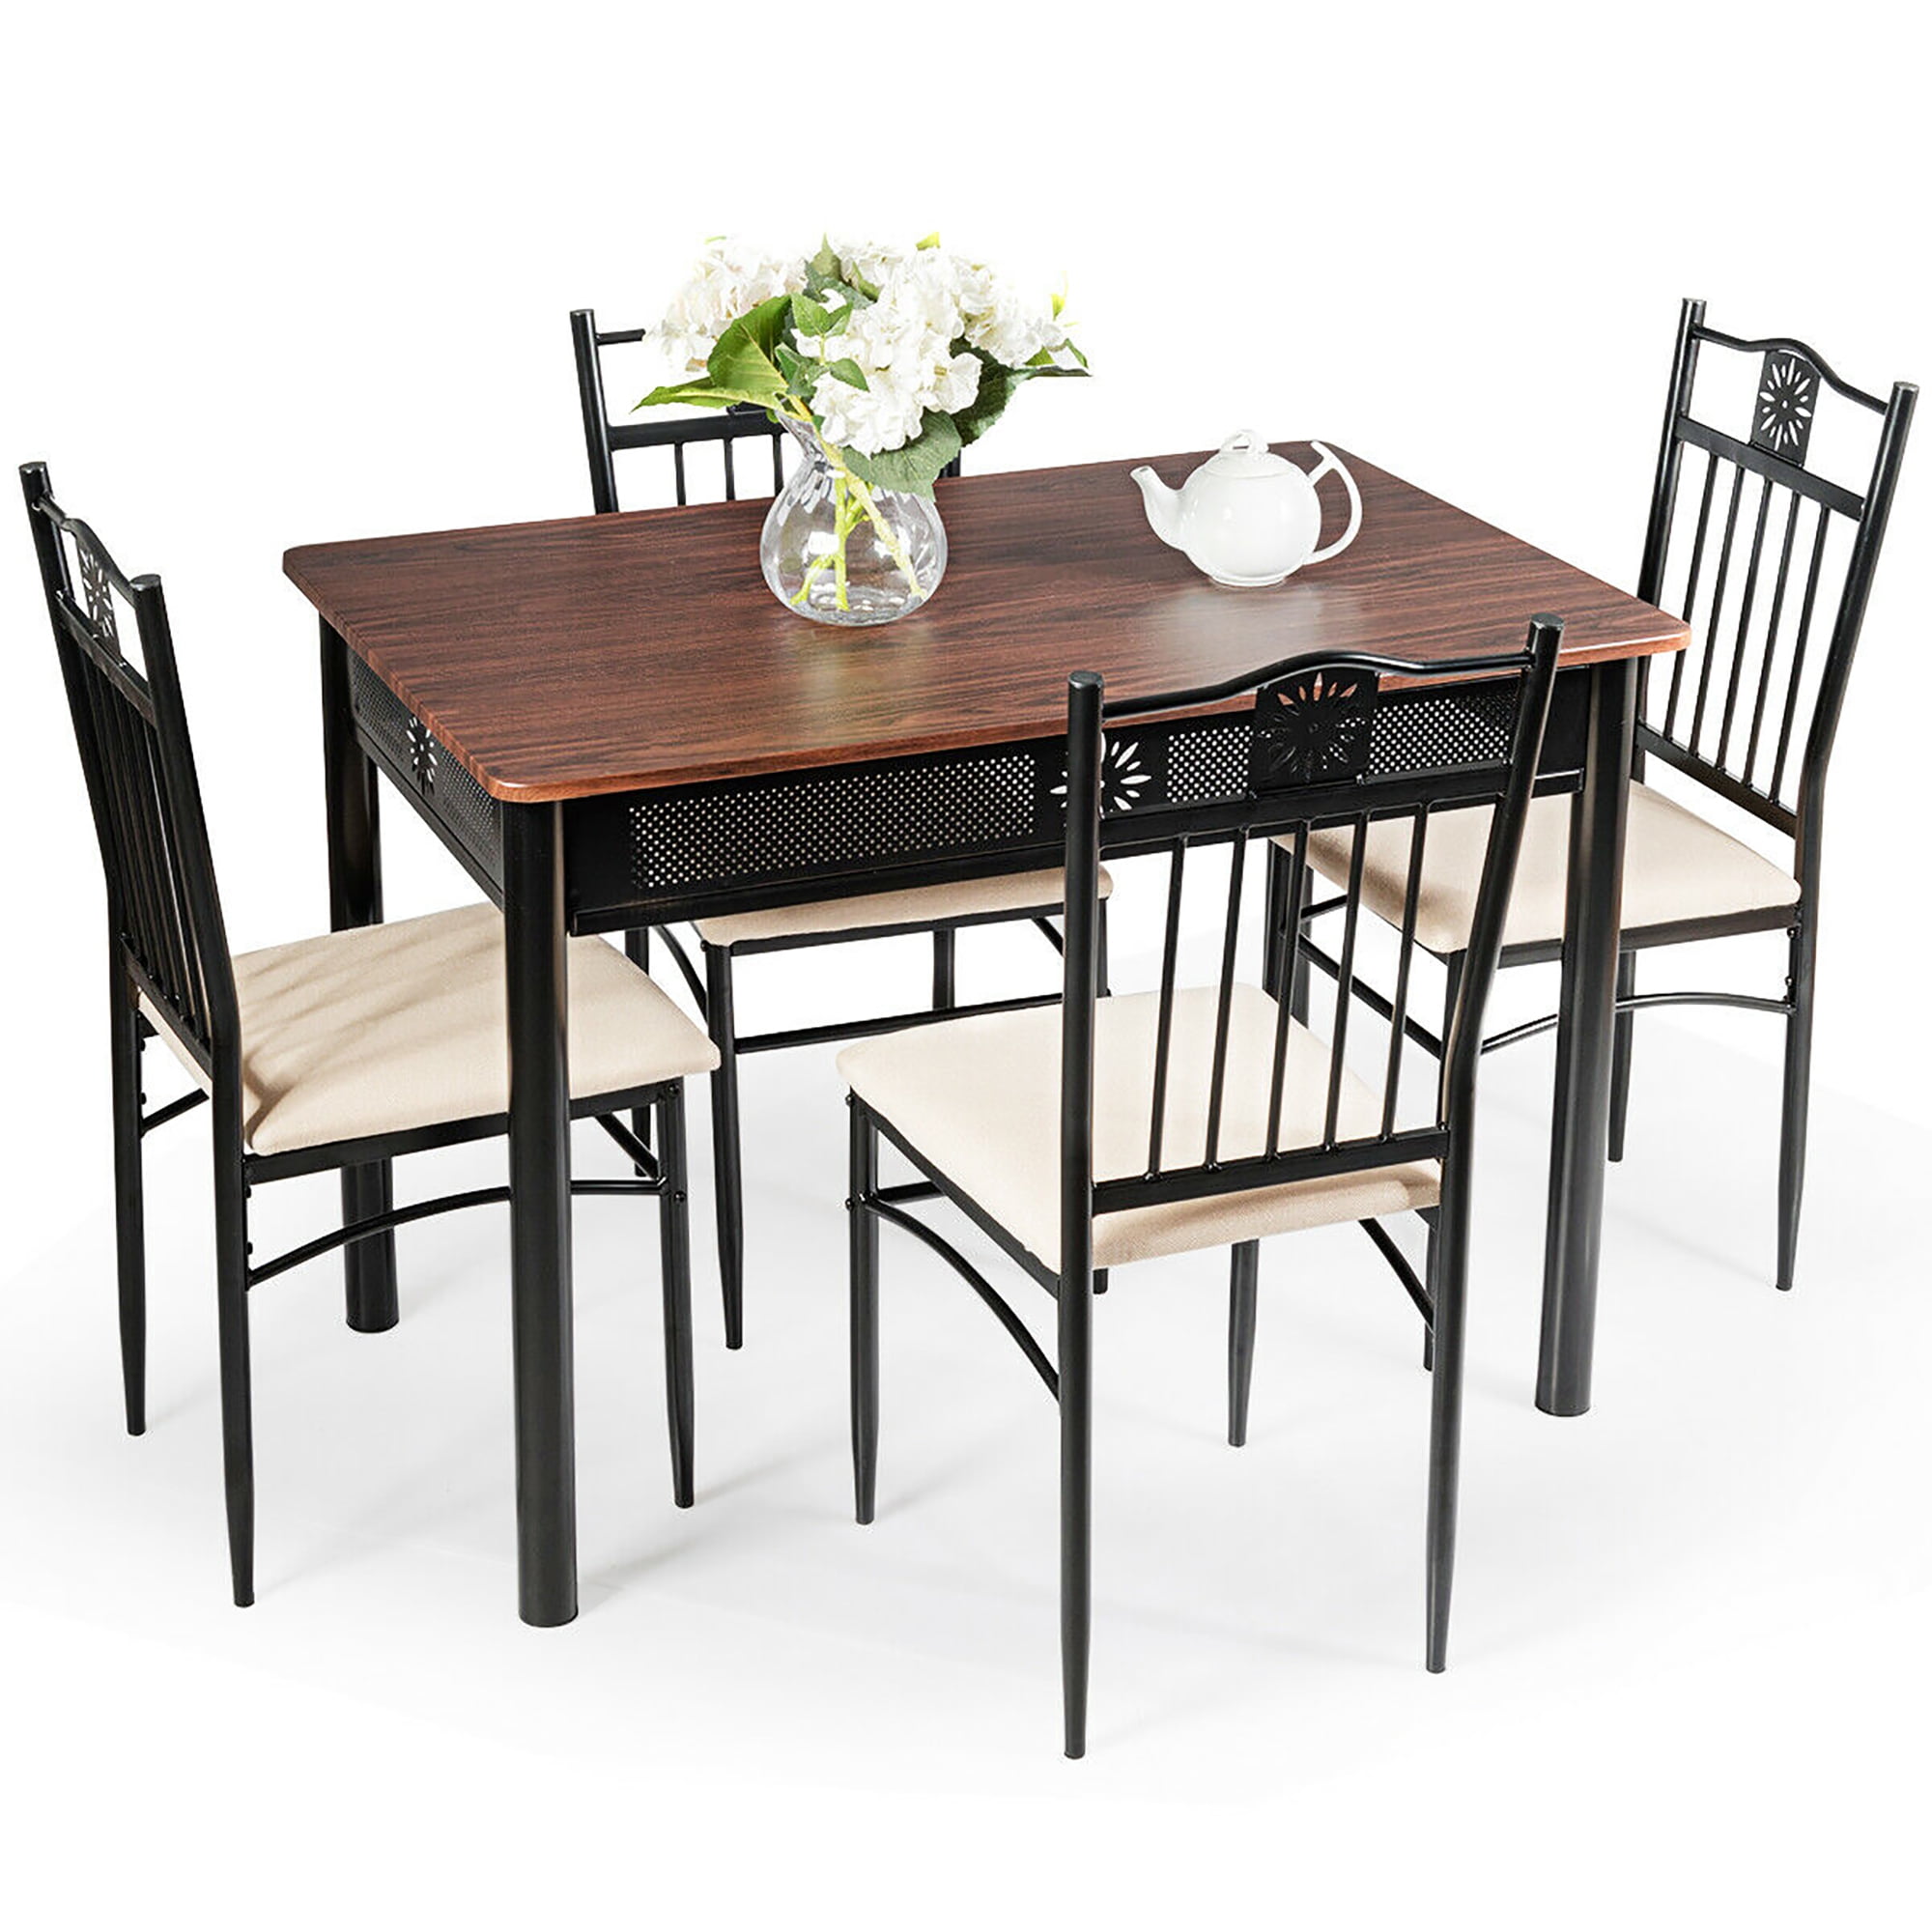 Details about   Costway 5pcs Dining Set Wood Table and 4 Fabric Chairs Home Kitchen Modern